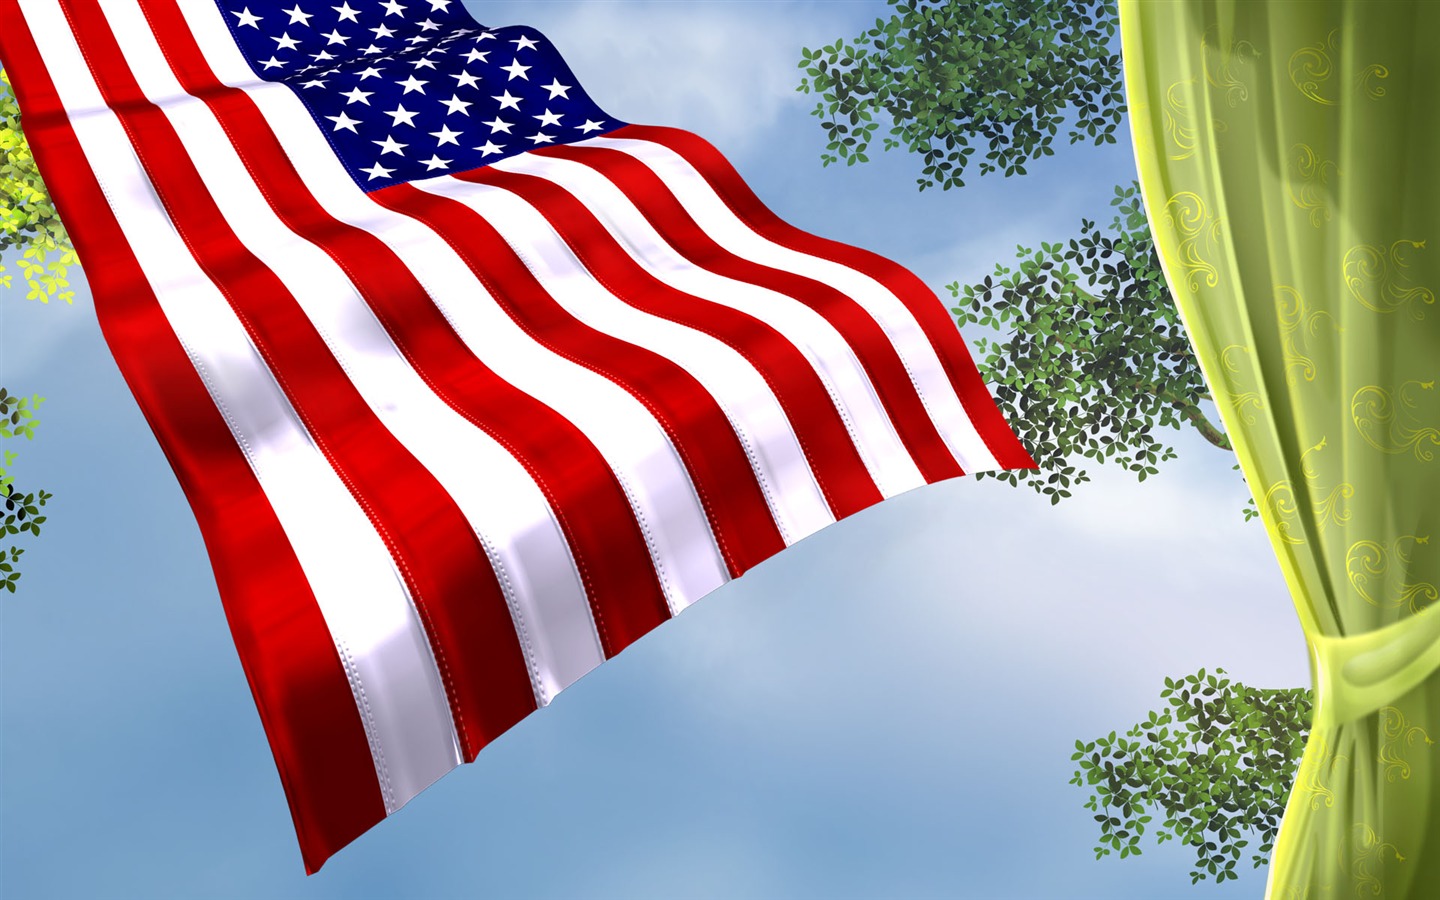 U.S. Independence Day theme wallpaper #33 - 1440x900